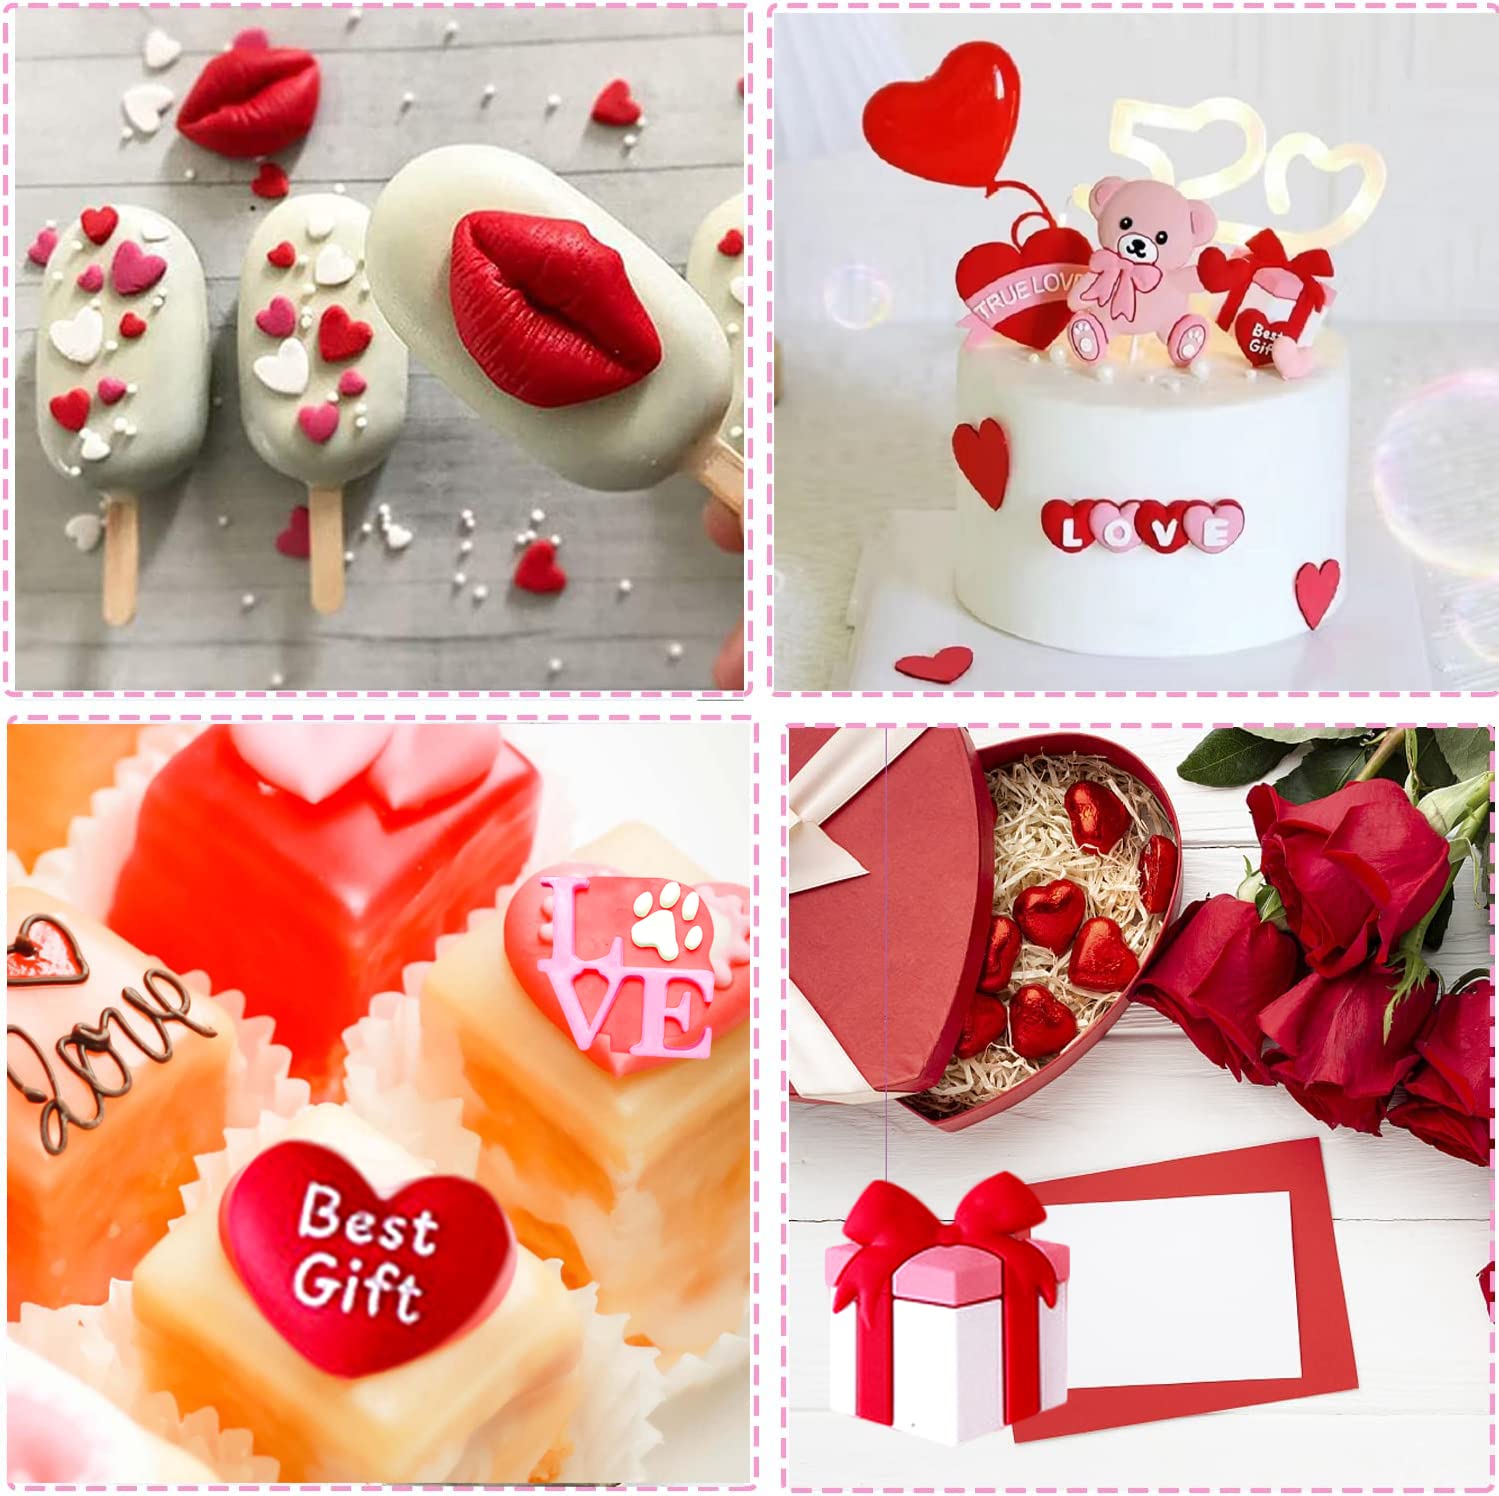 6 Pcs Valentine's Day Fondant Molds Wedding Fondant Cake Molds Bear Heart Love Lips Gift Shape Candy Silicone Molds Chocolate Mould for Cake Topper Polymer Clay Soap Wax Making Party Supplies